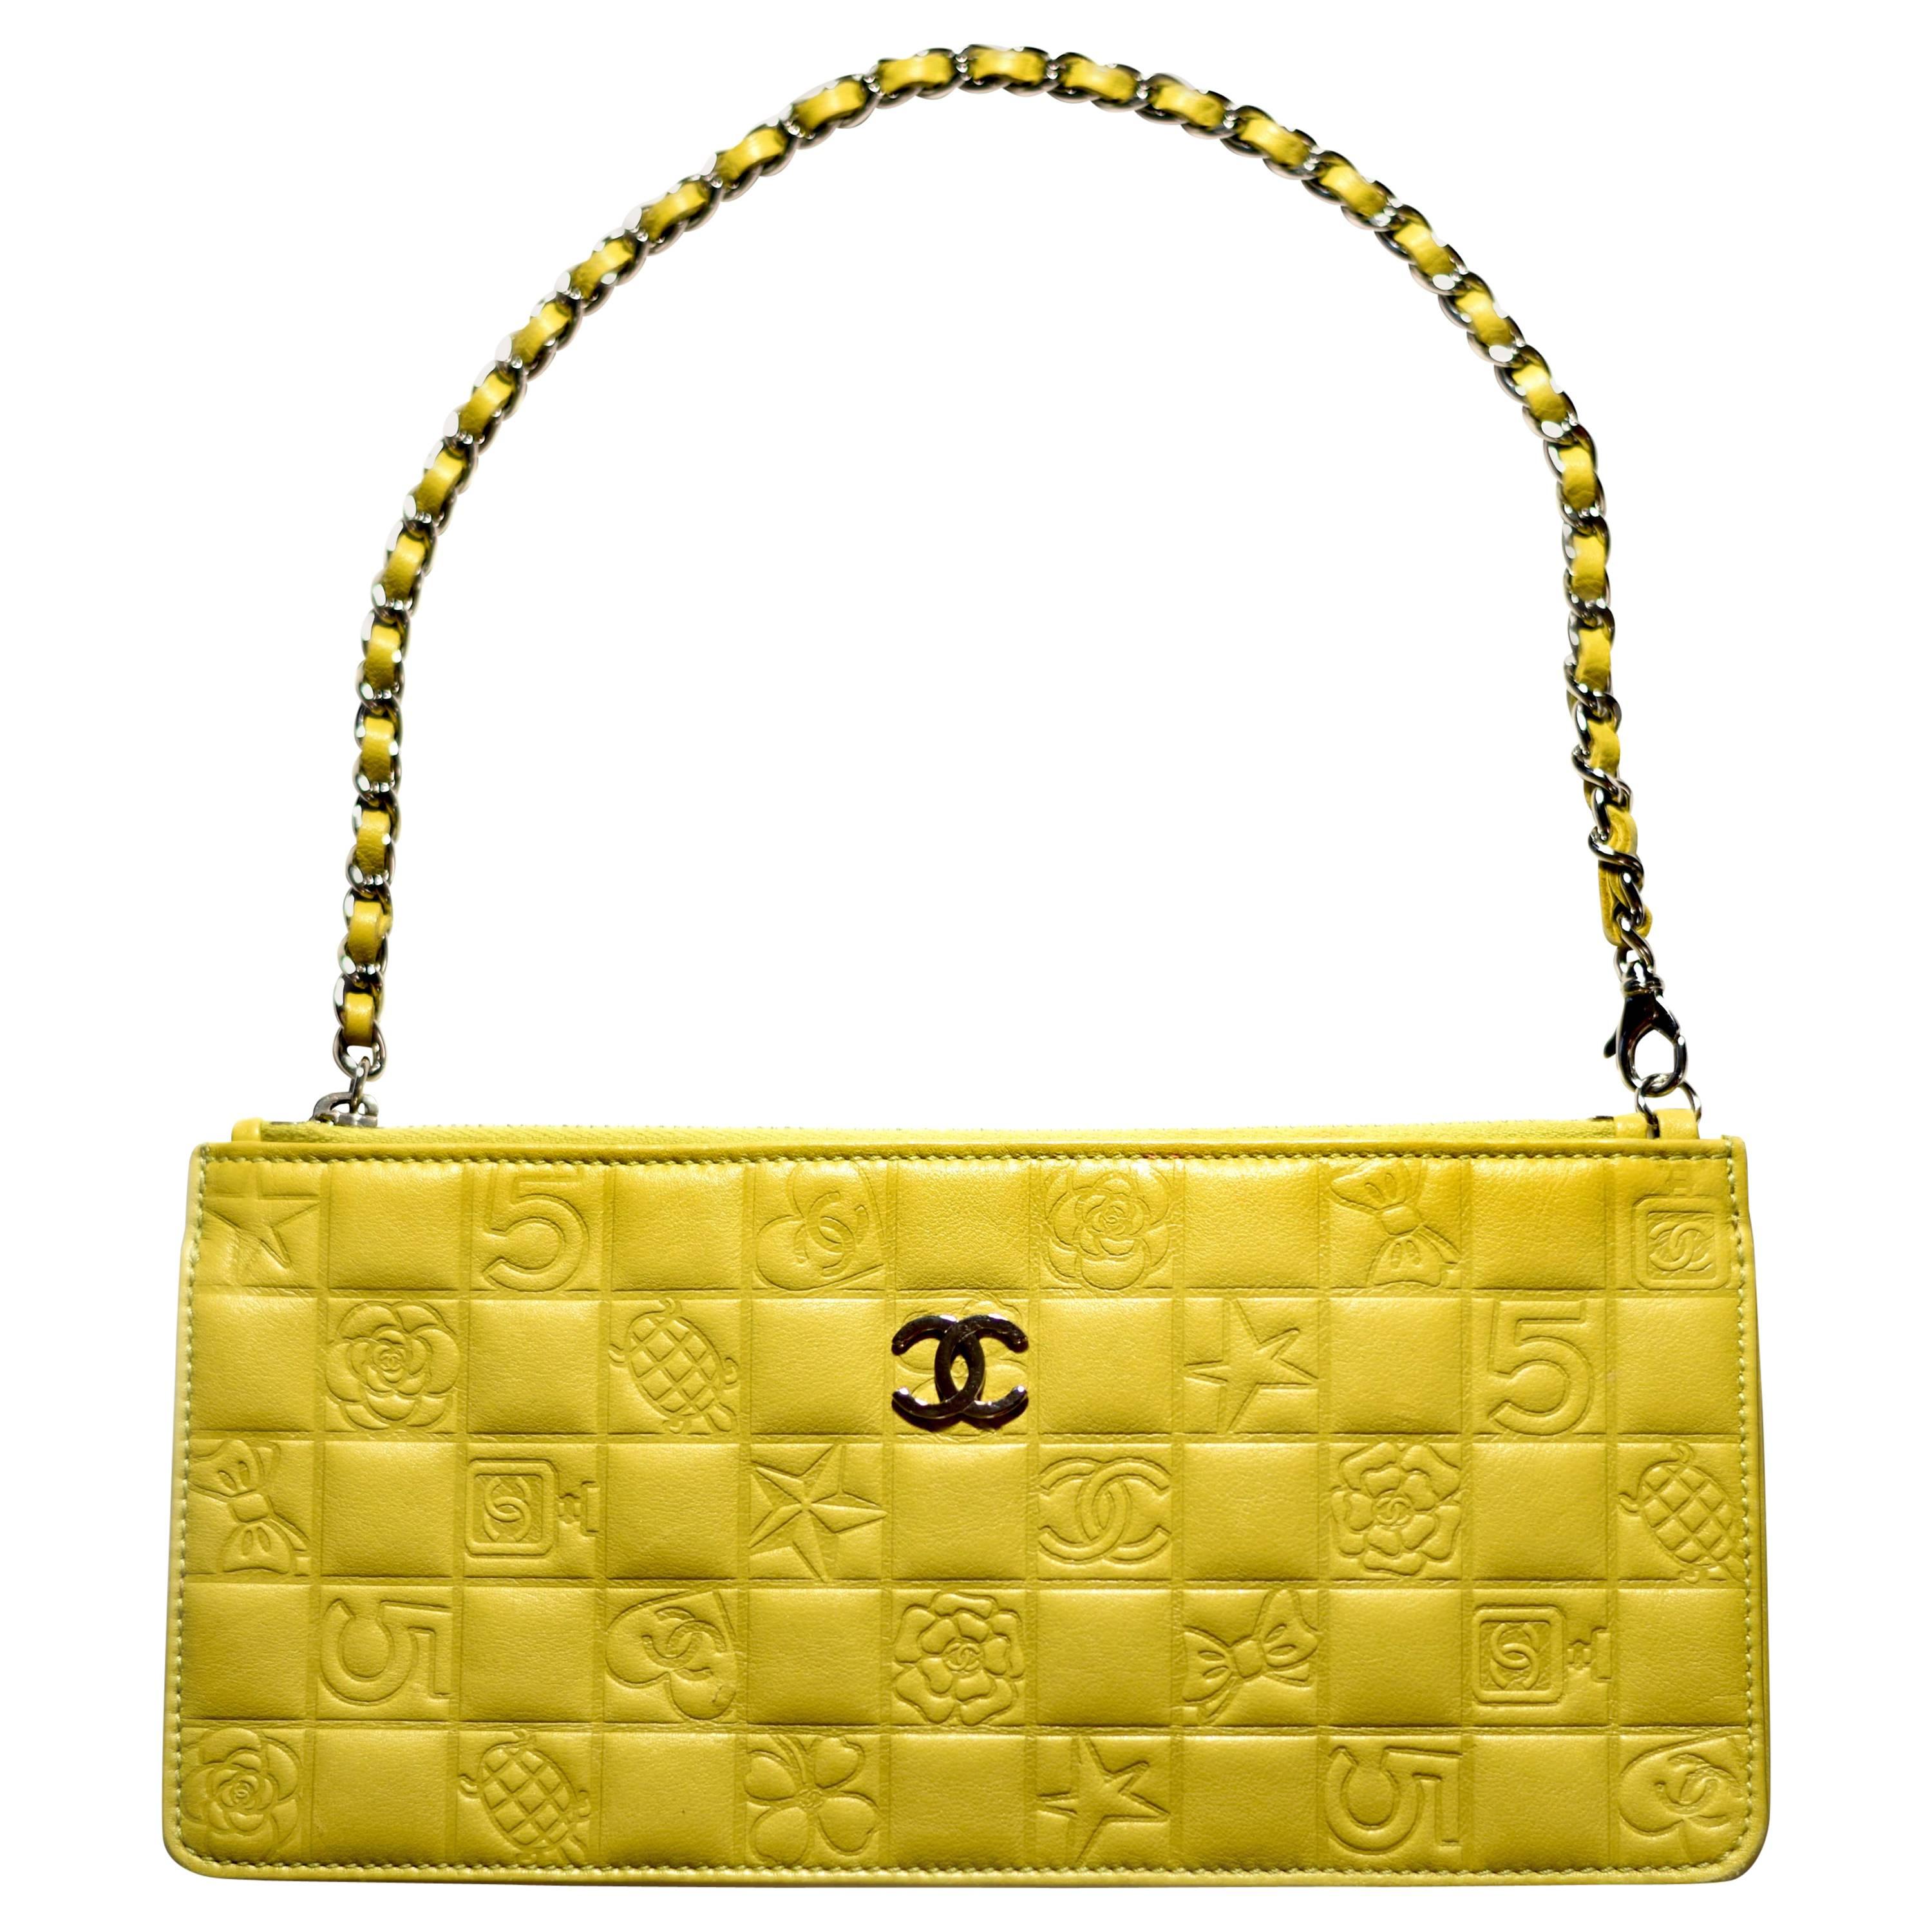 Chanel Lucky Charm Bag - Yellow Leather CC Symbols Silver Chain Clutch Handbag For Sale